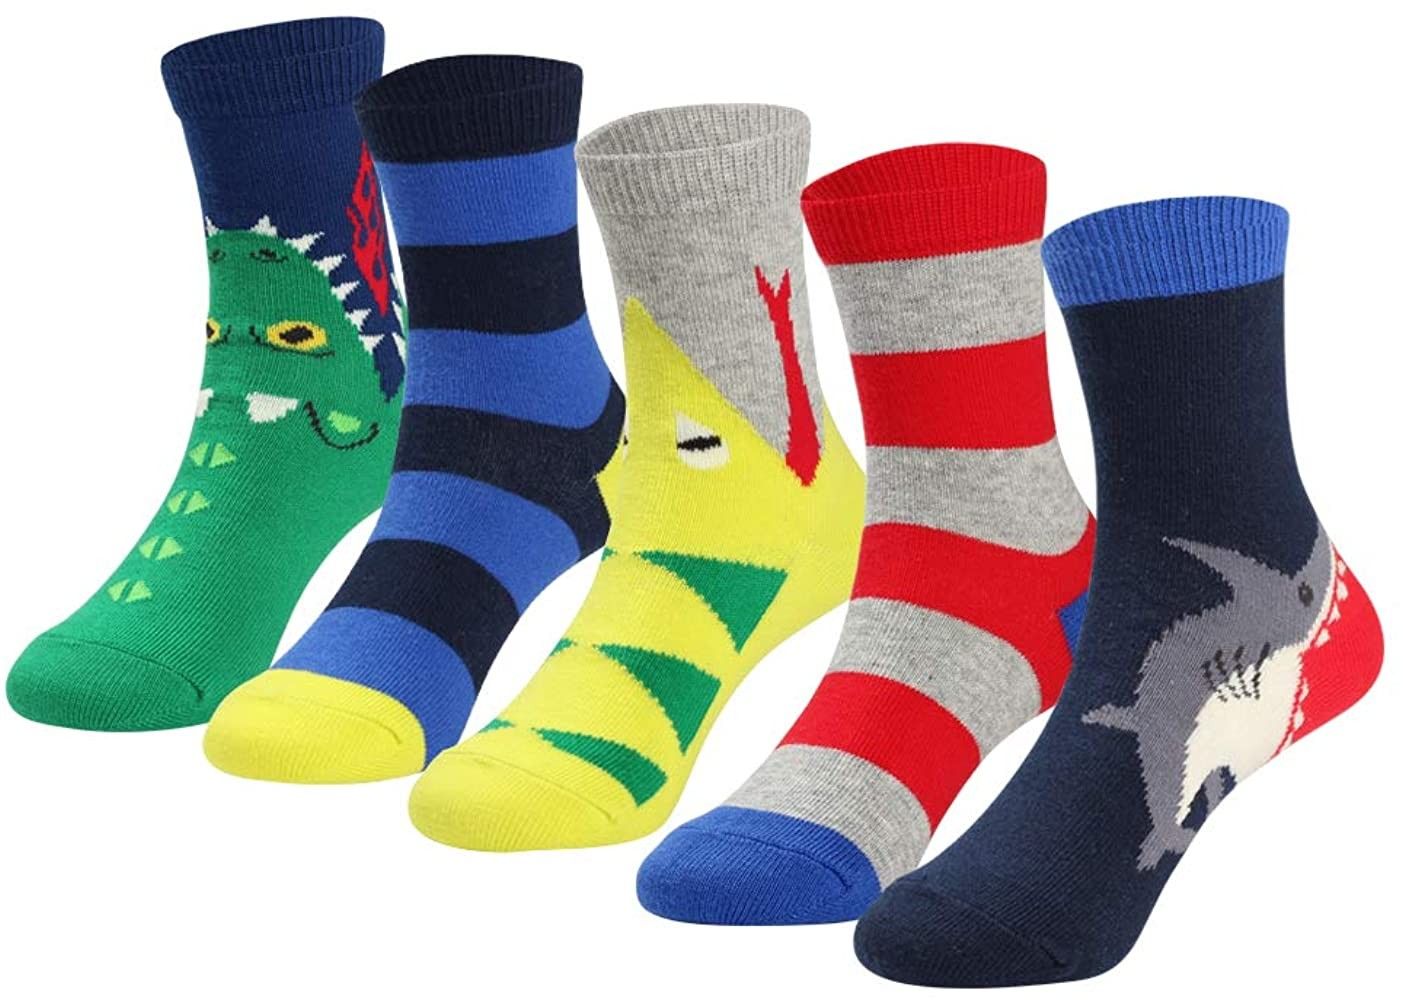 COTTON DAY Boys Fun Novelty Design Socks Bright Colors Pack of 5 | Amazon (US)